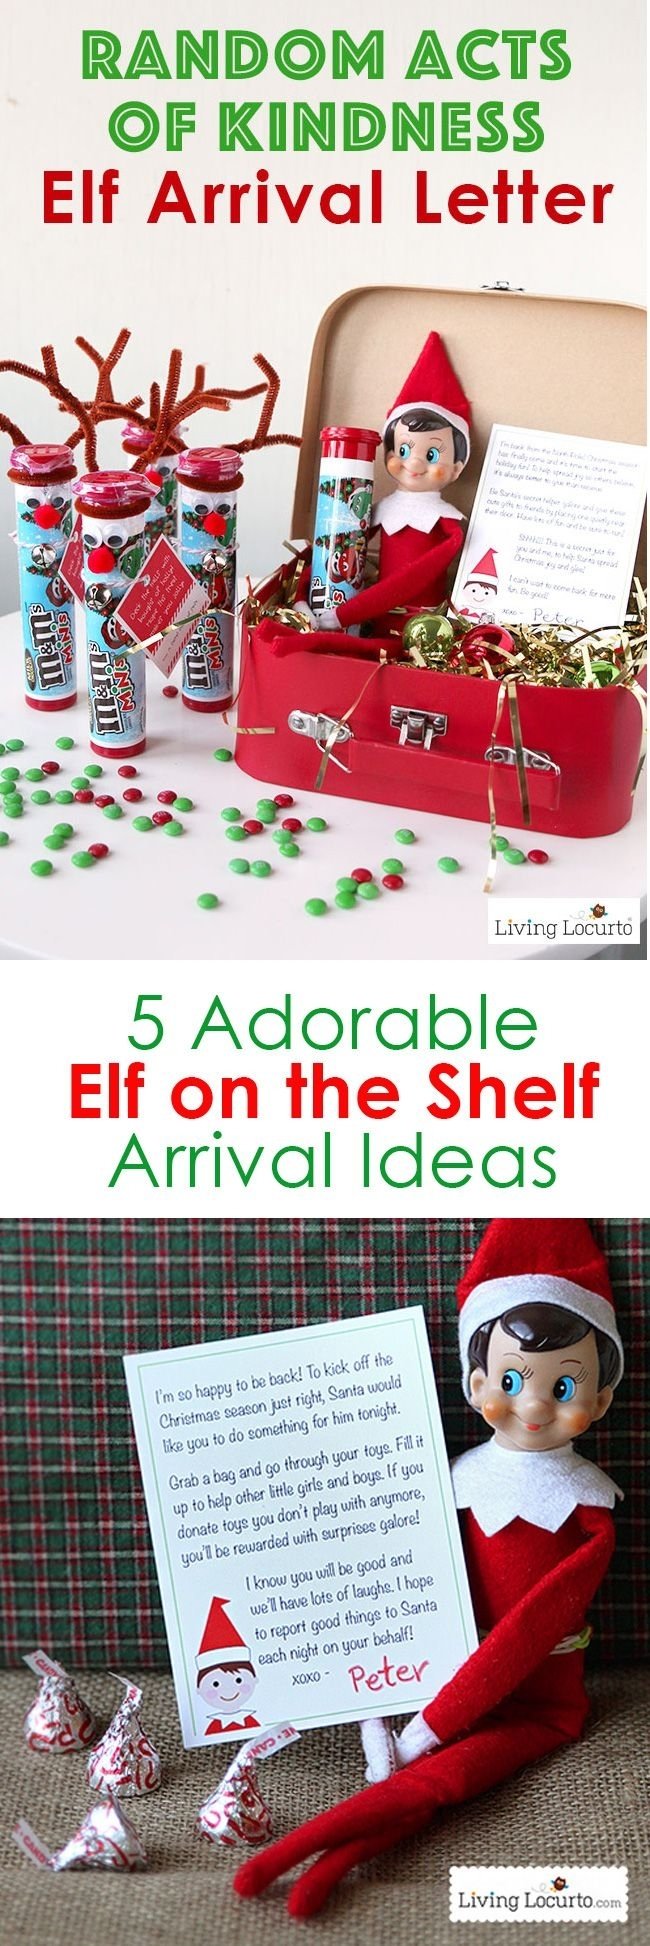 10 Nice Elf On The Shelf Ideas For Arrival creative elf on the shelf arrival ideas unique printables and cute 2022